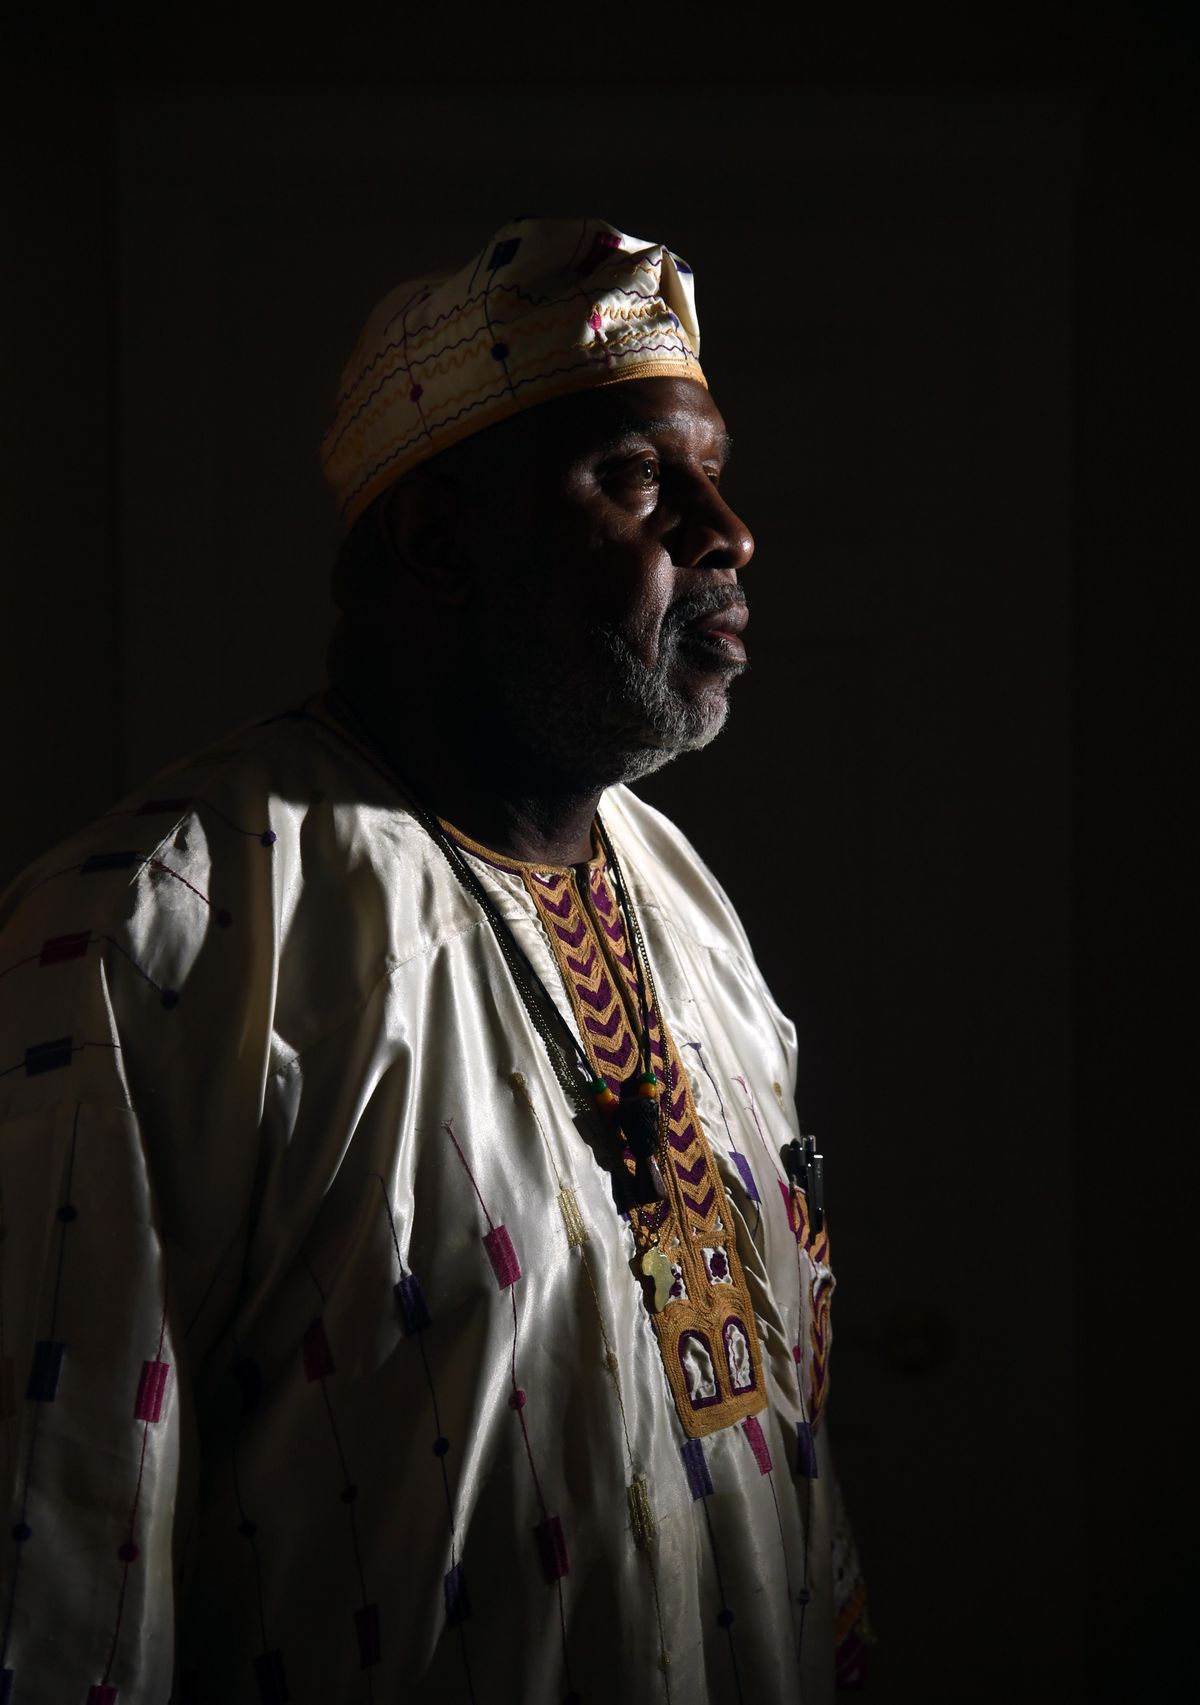 James Wilburn Jr., former president of the Spokane chapter of the NAACP, grew up just minutes from the Memphis hotel where Martin Luther King Jr. was shot. “As a 16-year-old, I began to understand who Dr. King was and what he meant.” (DAN PELLE/The Spokesman-Review)